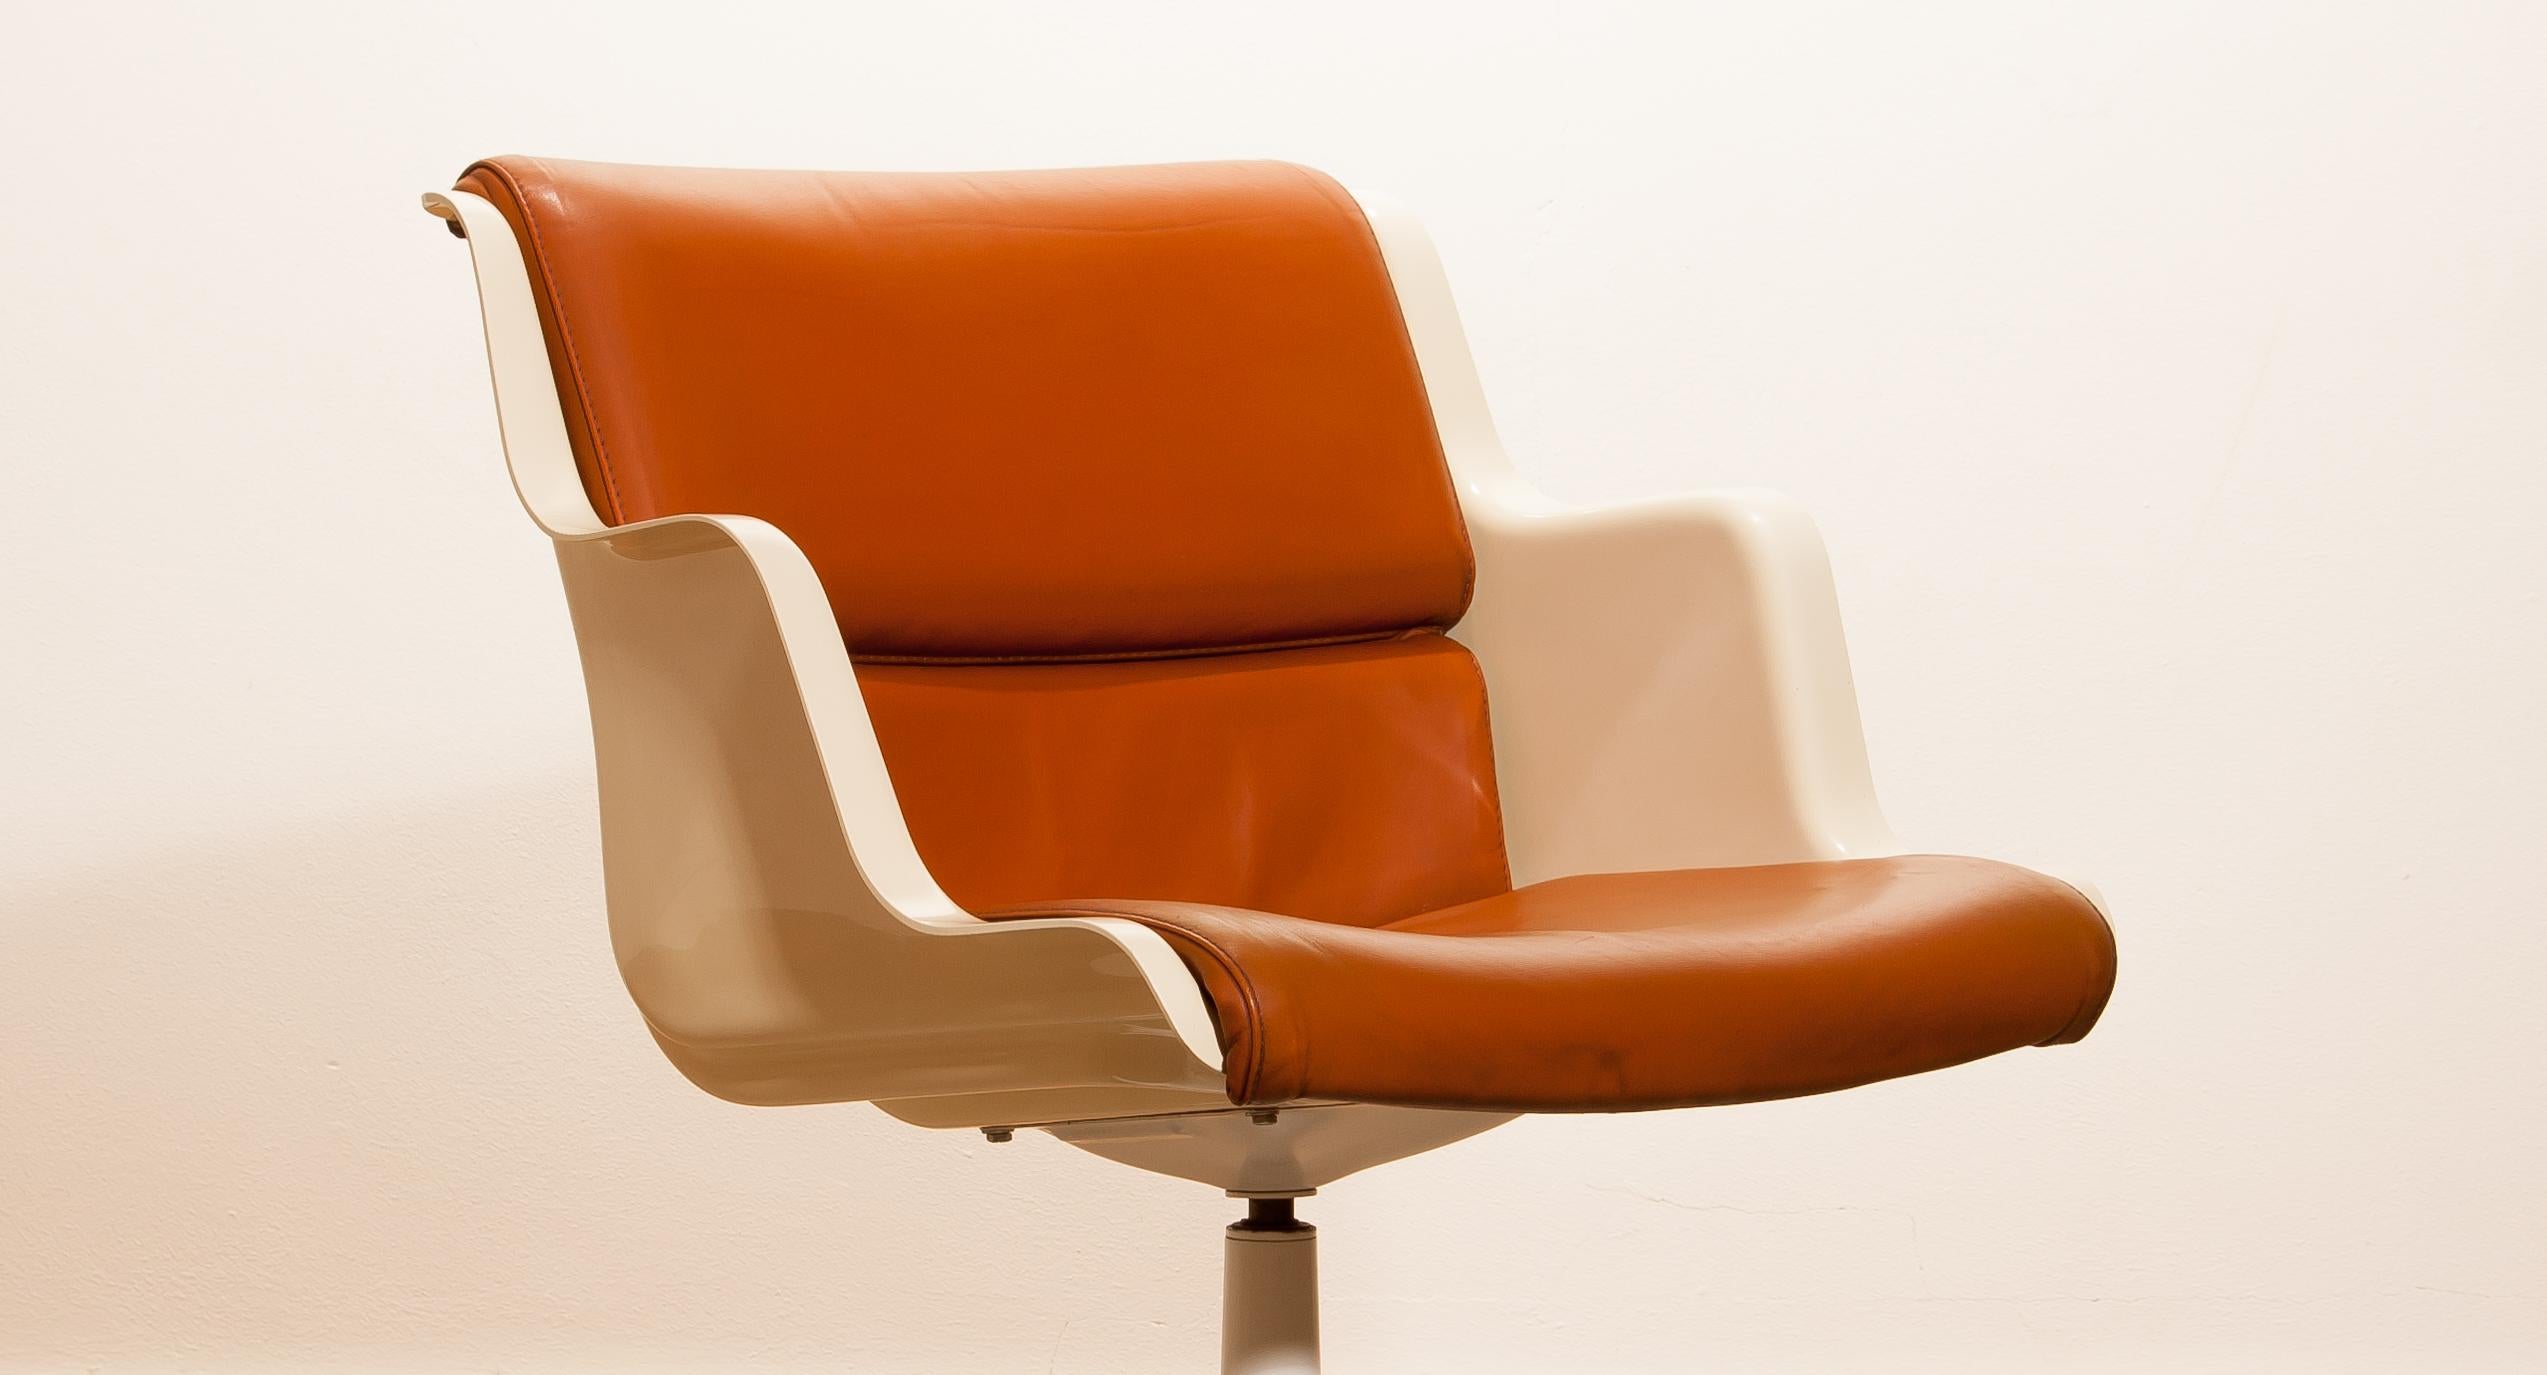 Beautiful desk chair designed by Yrjö Kukkapuro for Haimi, Finland.
This chair is made of a cognac leather seating in an off-white fibreglass shell on a white lacquered metal swivel stand.
The chair is labelled.
It is in a very nice